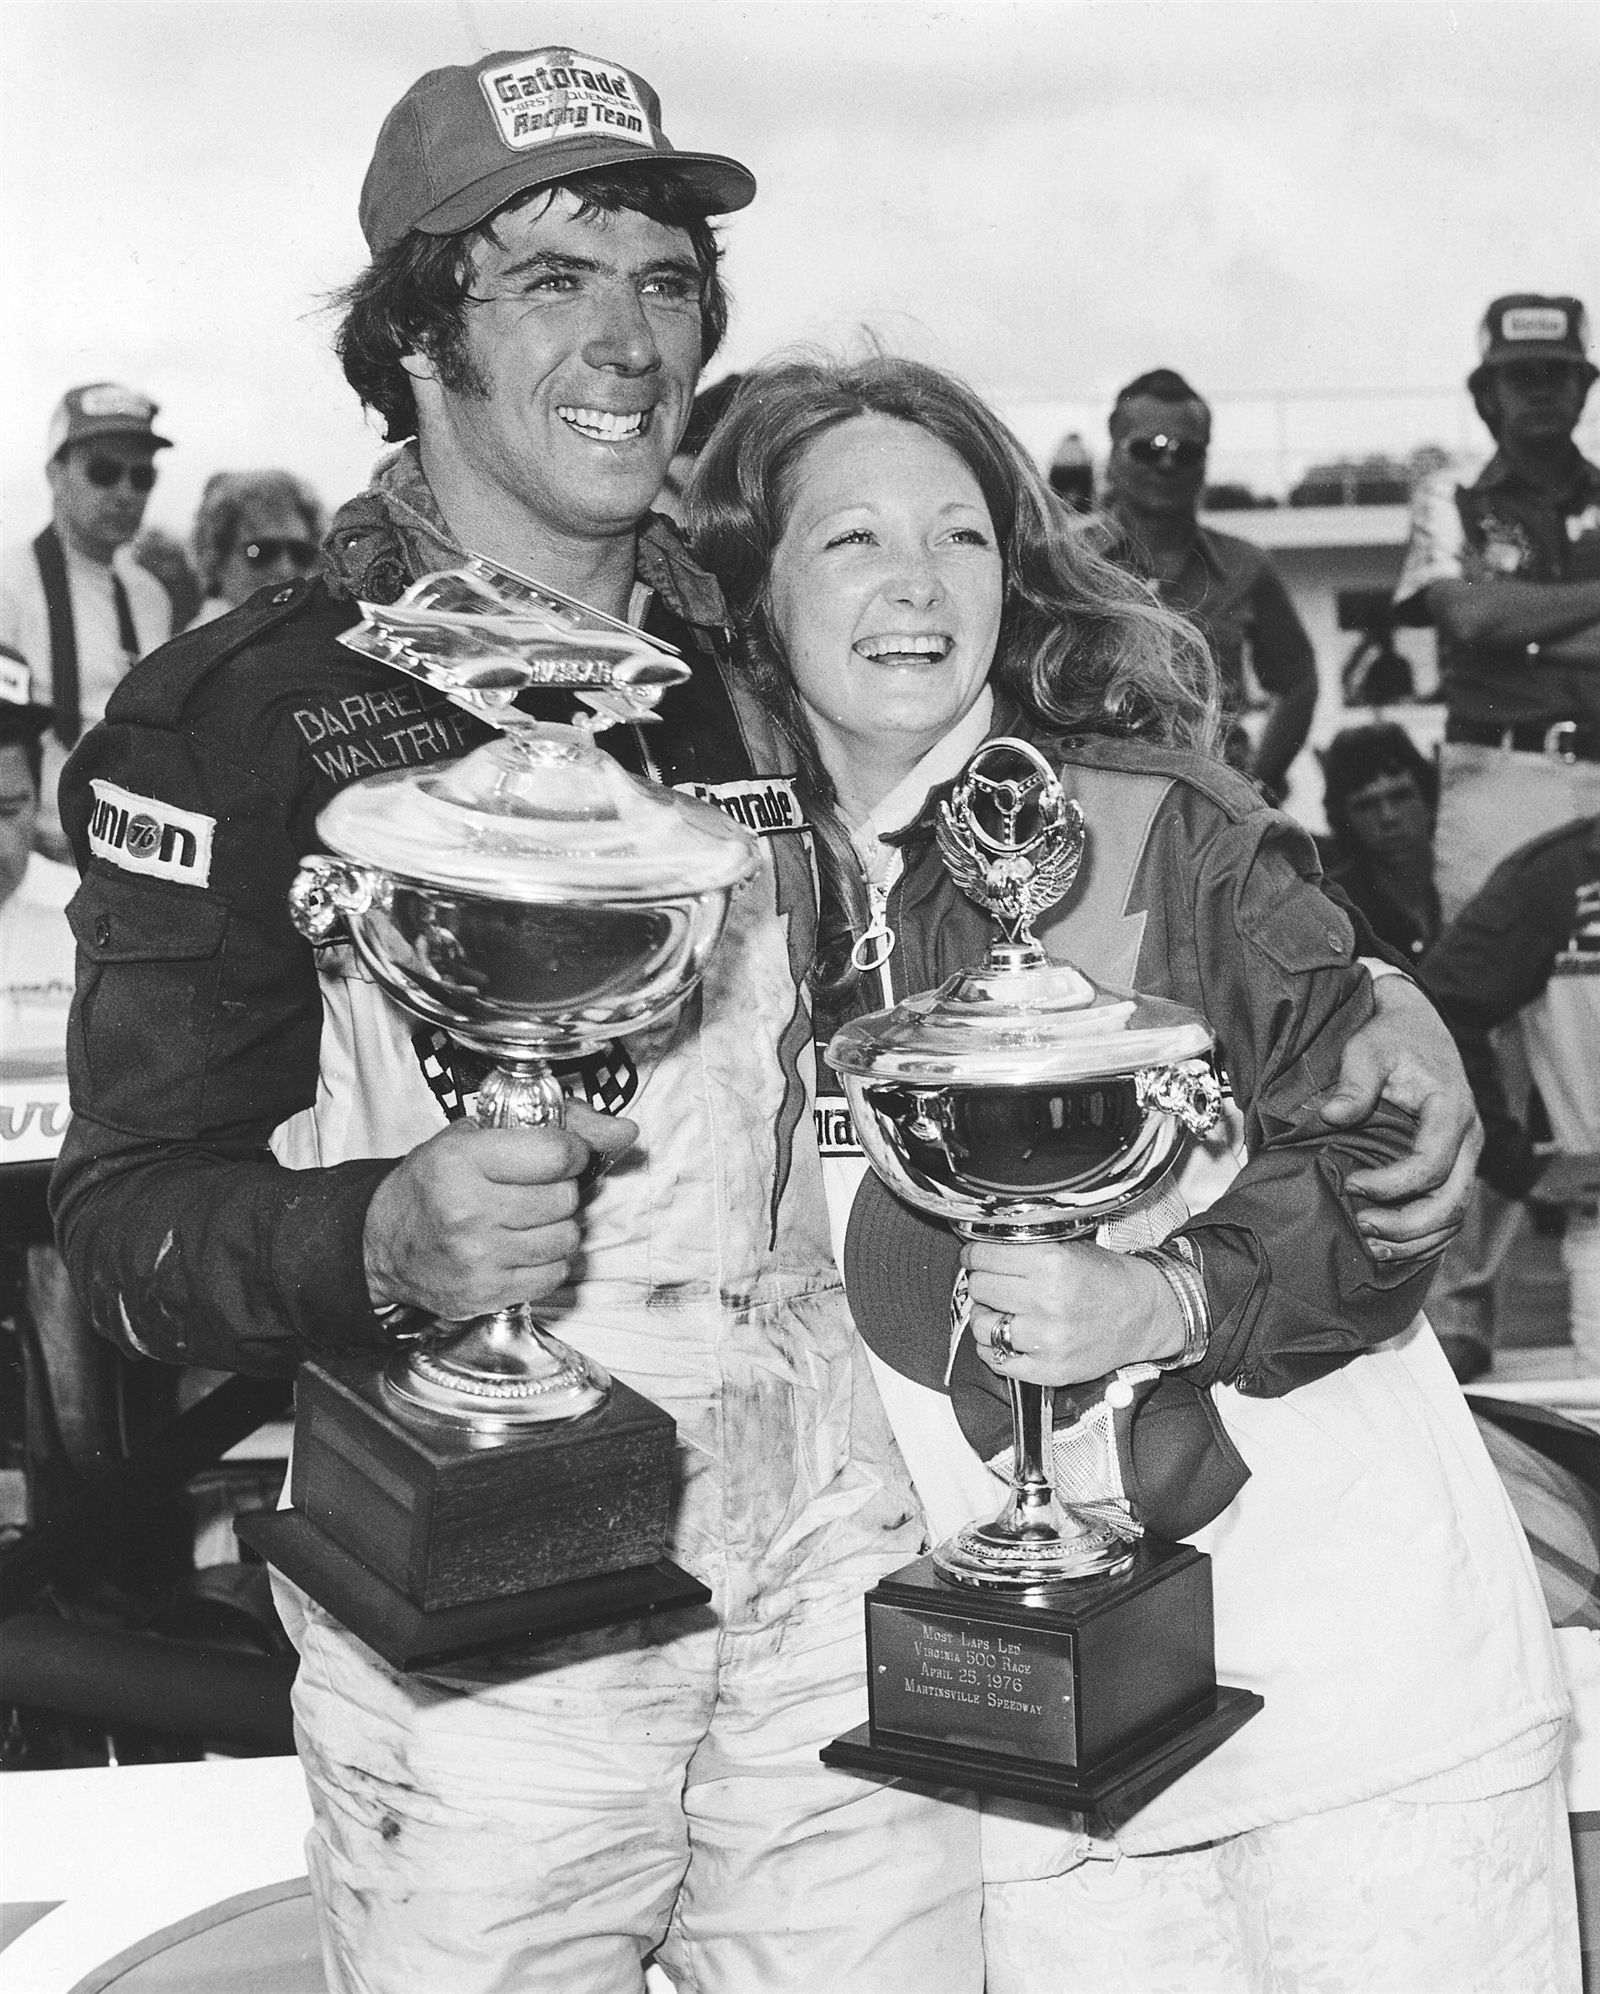 Waltrip celebrates winning at Martinsville with his wife Stevie